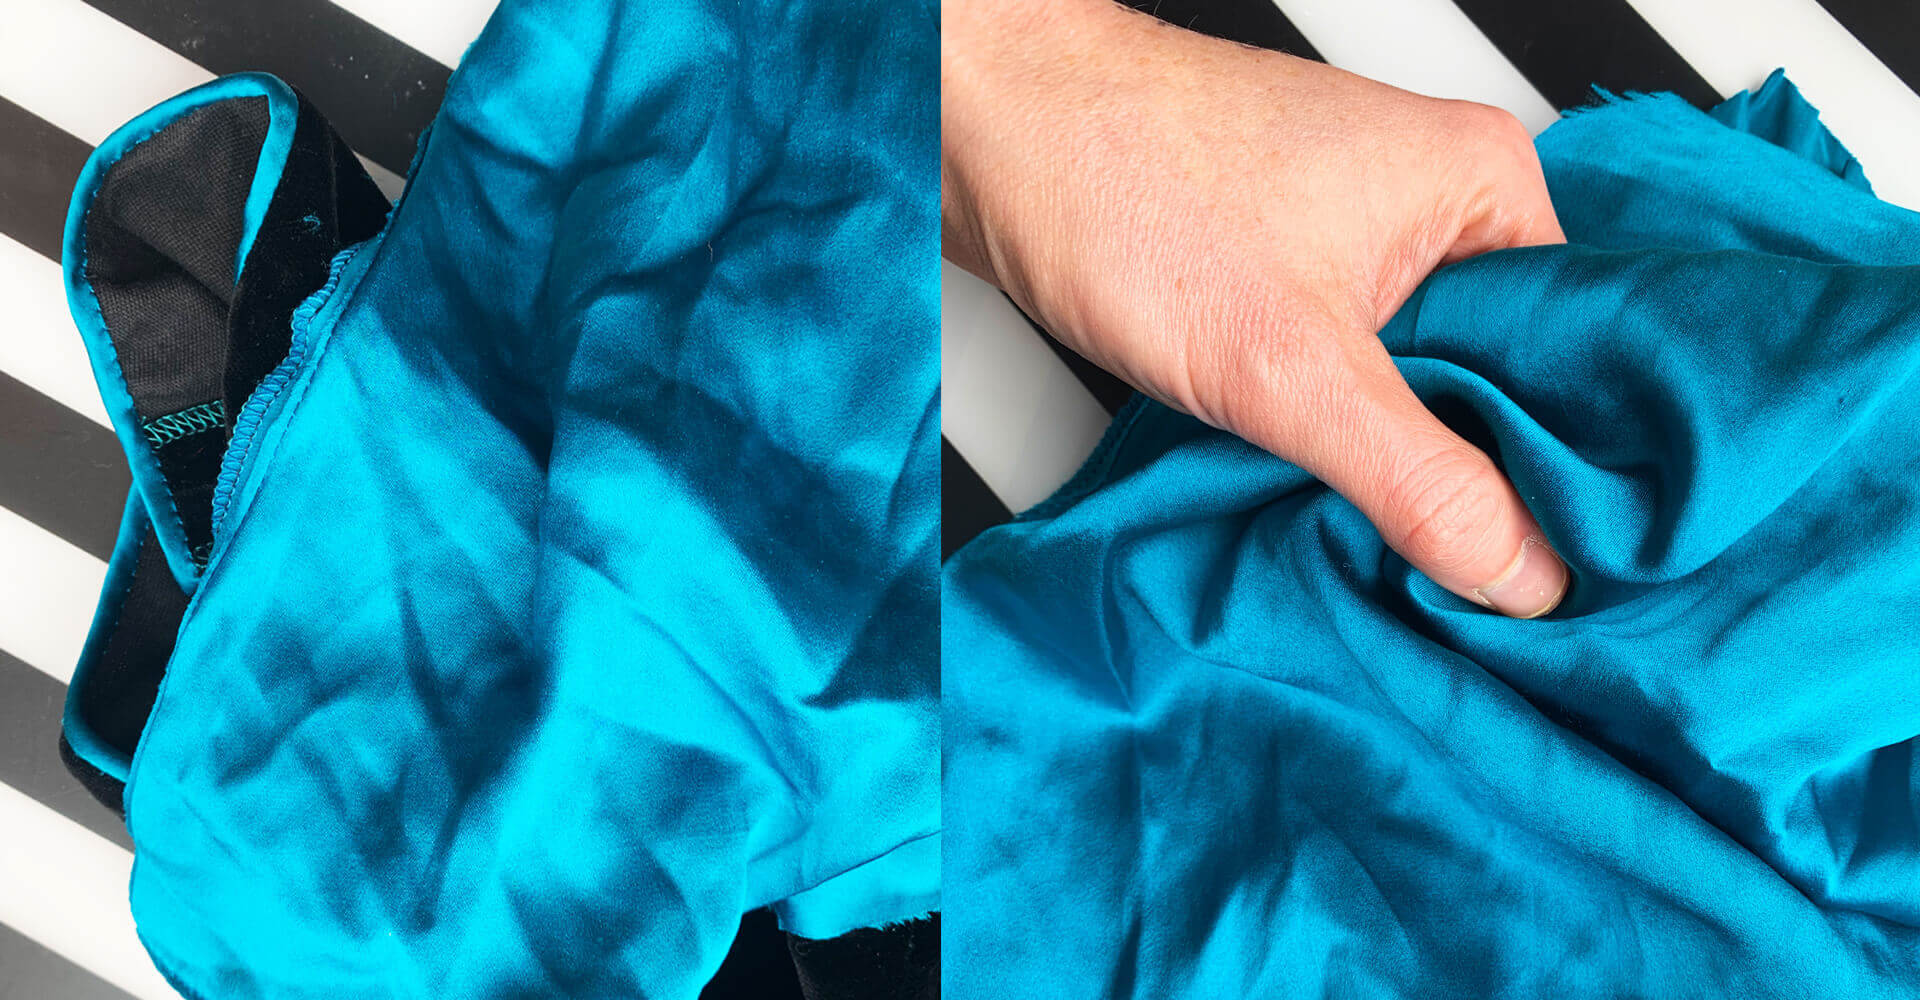 A close up of some teal coloured satin fabric, seen against a bold black and white striped background. A woman's hand is holding the fabric and some of the black velvet bodice of the original dress is visible